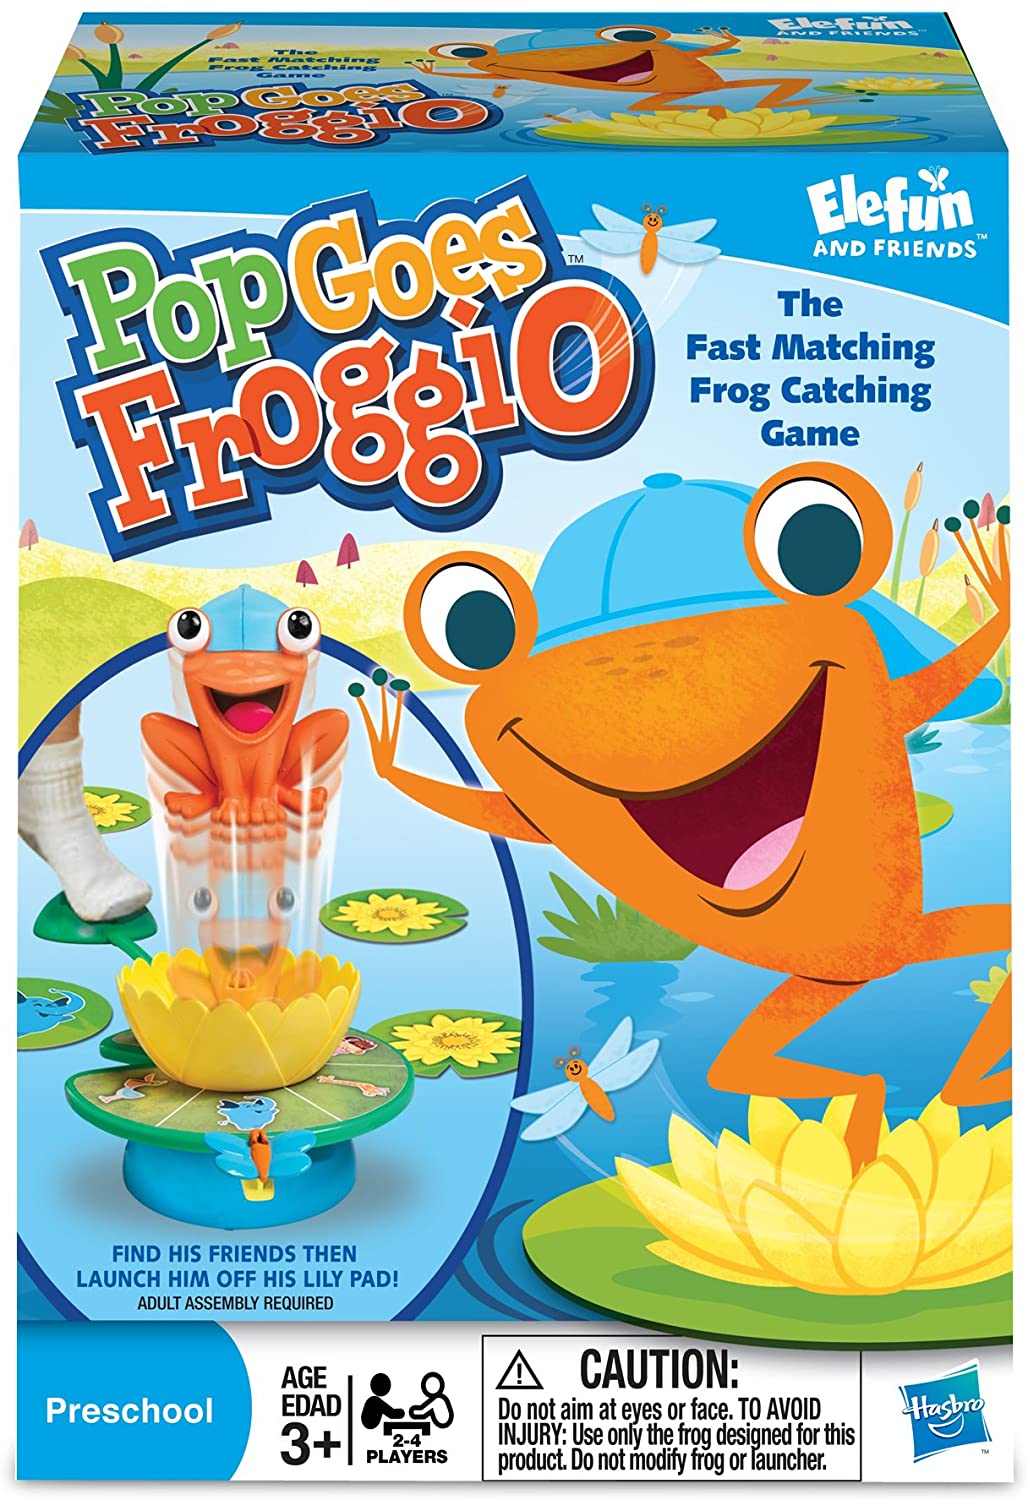 7 Best Frog Jump Game Ideas For Kids Reviews in 2022 1